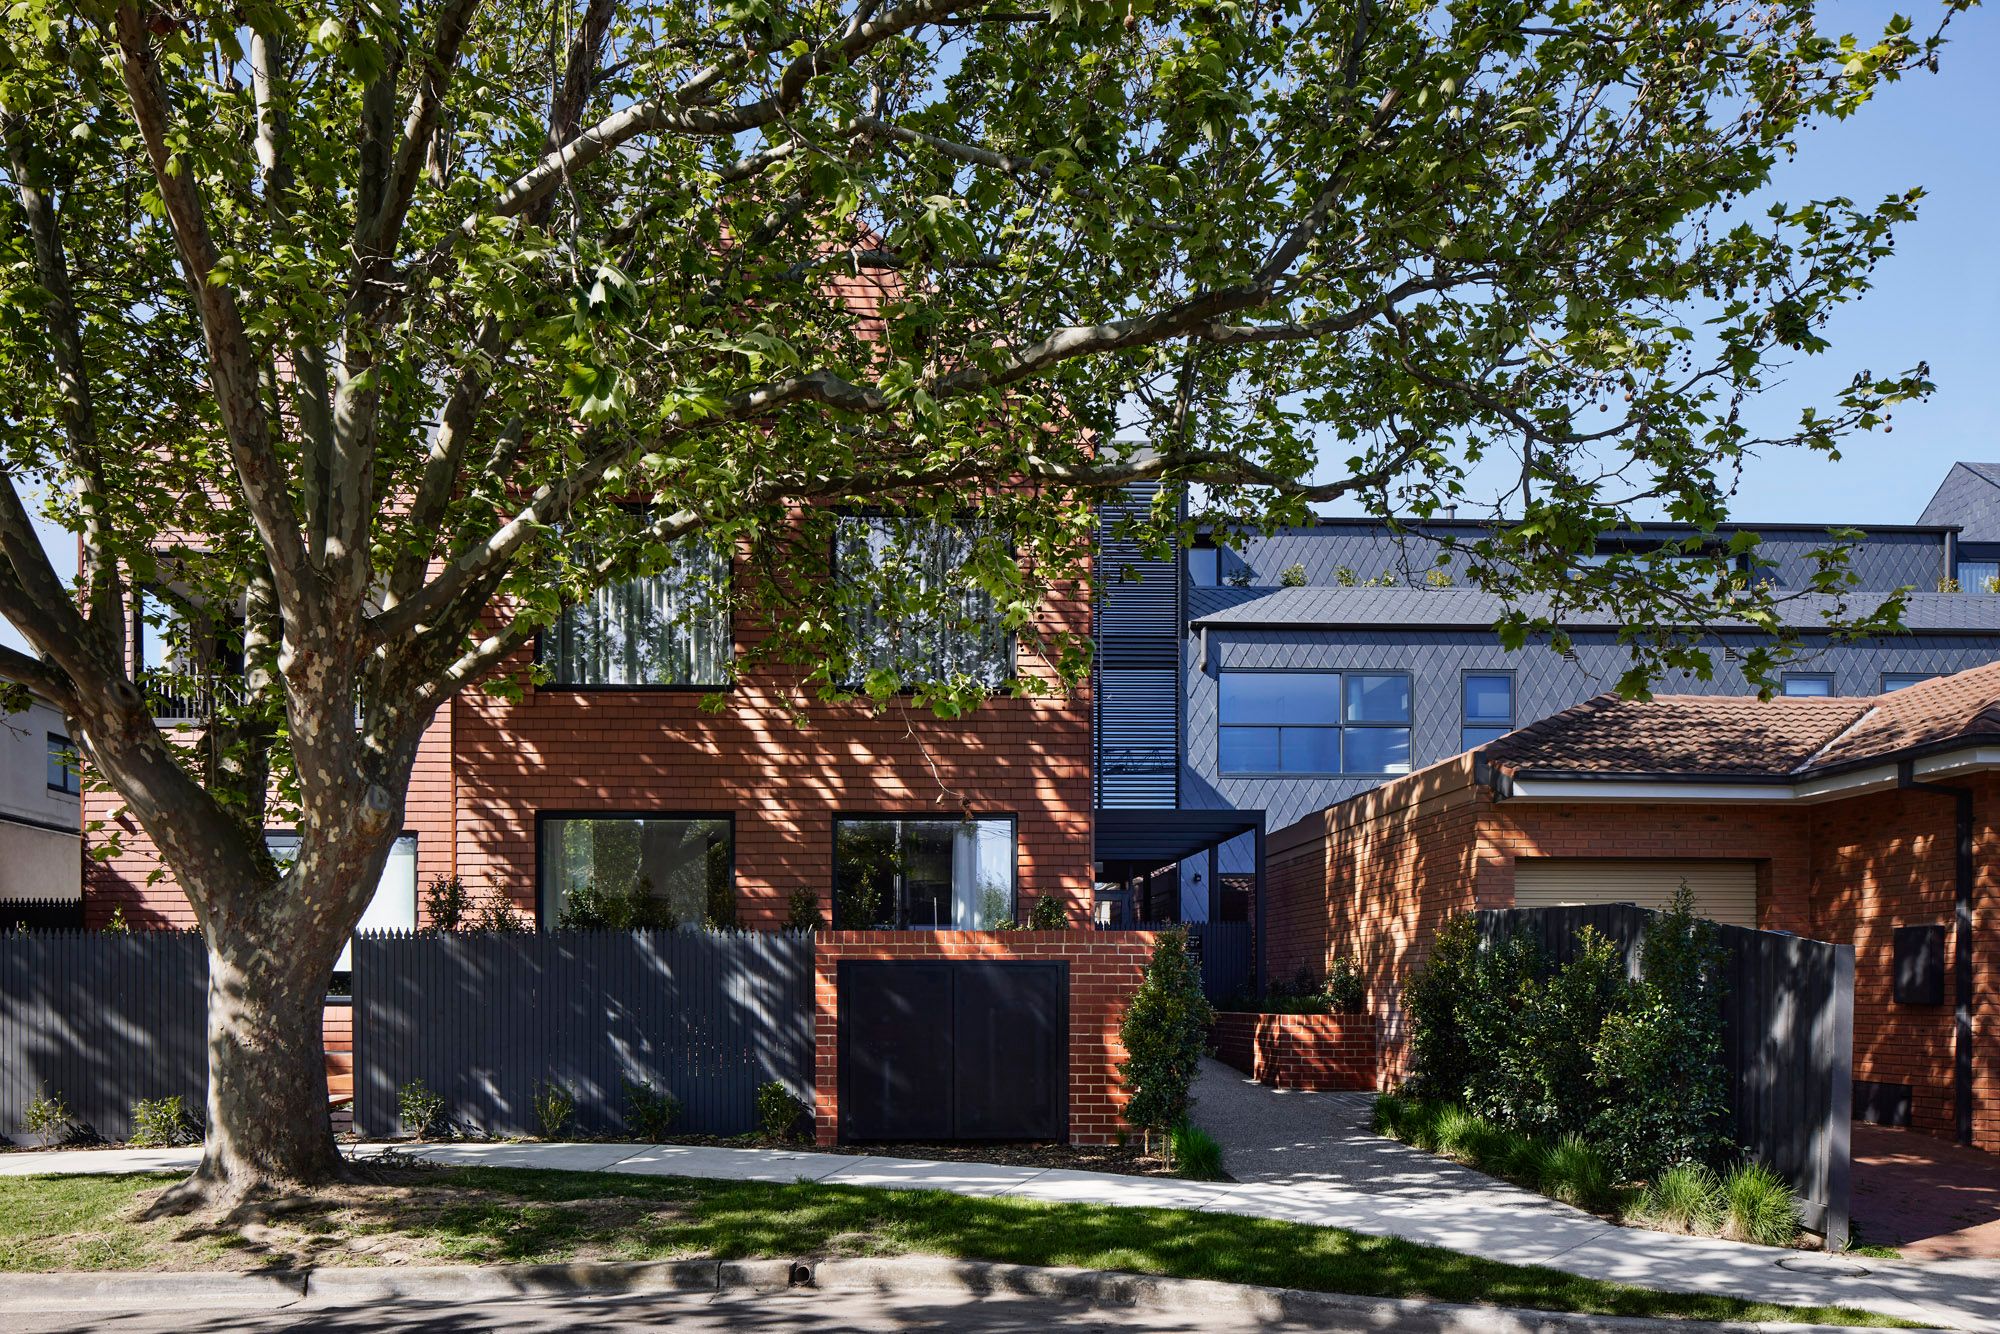 Slate House by Austin Maynard Architects. Exterior facade view from Bleazbby Ave. 